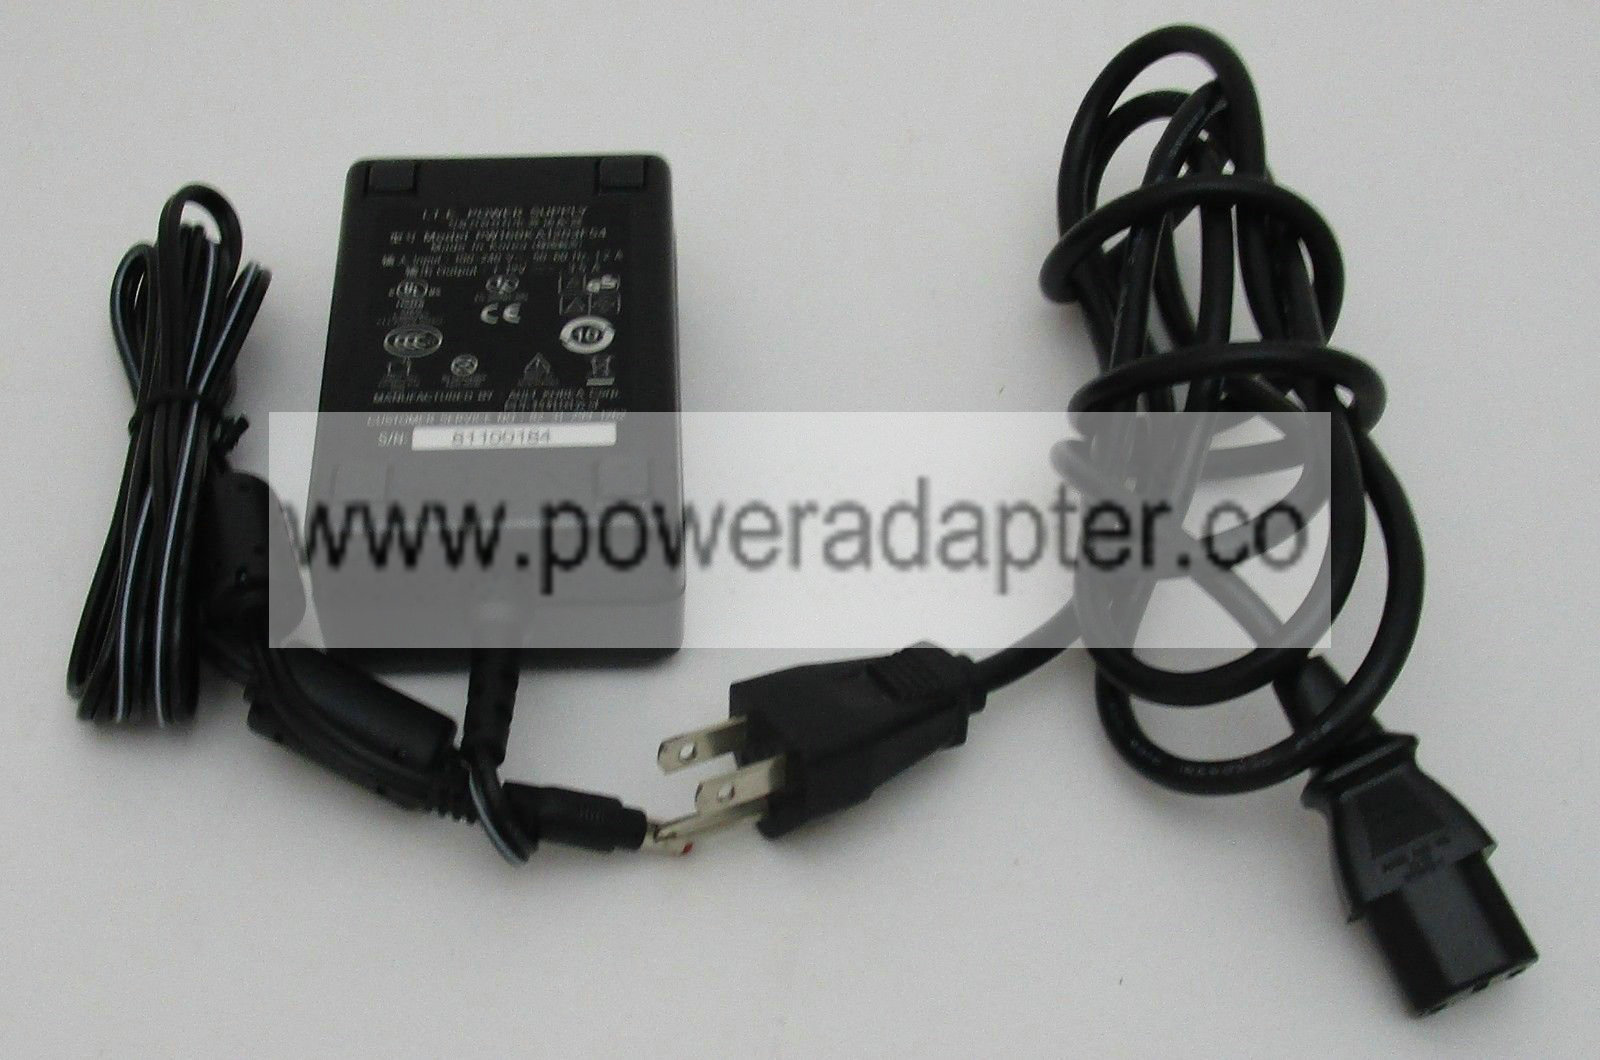 New Ault 12V 3.5A Medical Power Supply AC Power Adapter PW160KA1203F54 Type: AC/Standard Modified Item: No MPN: PW16